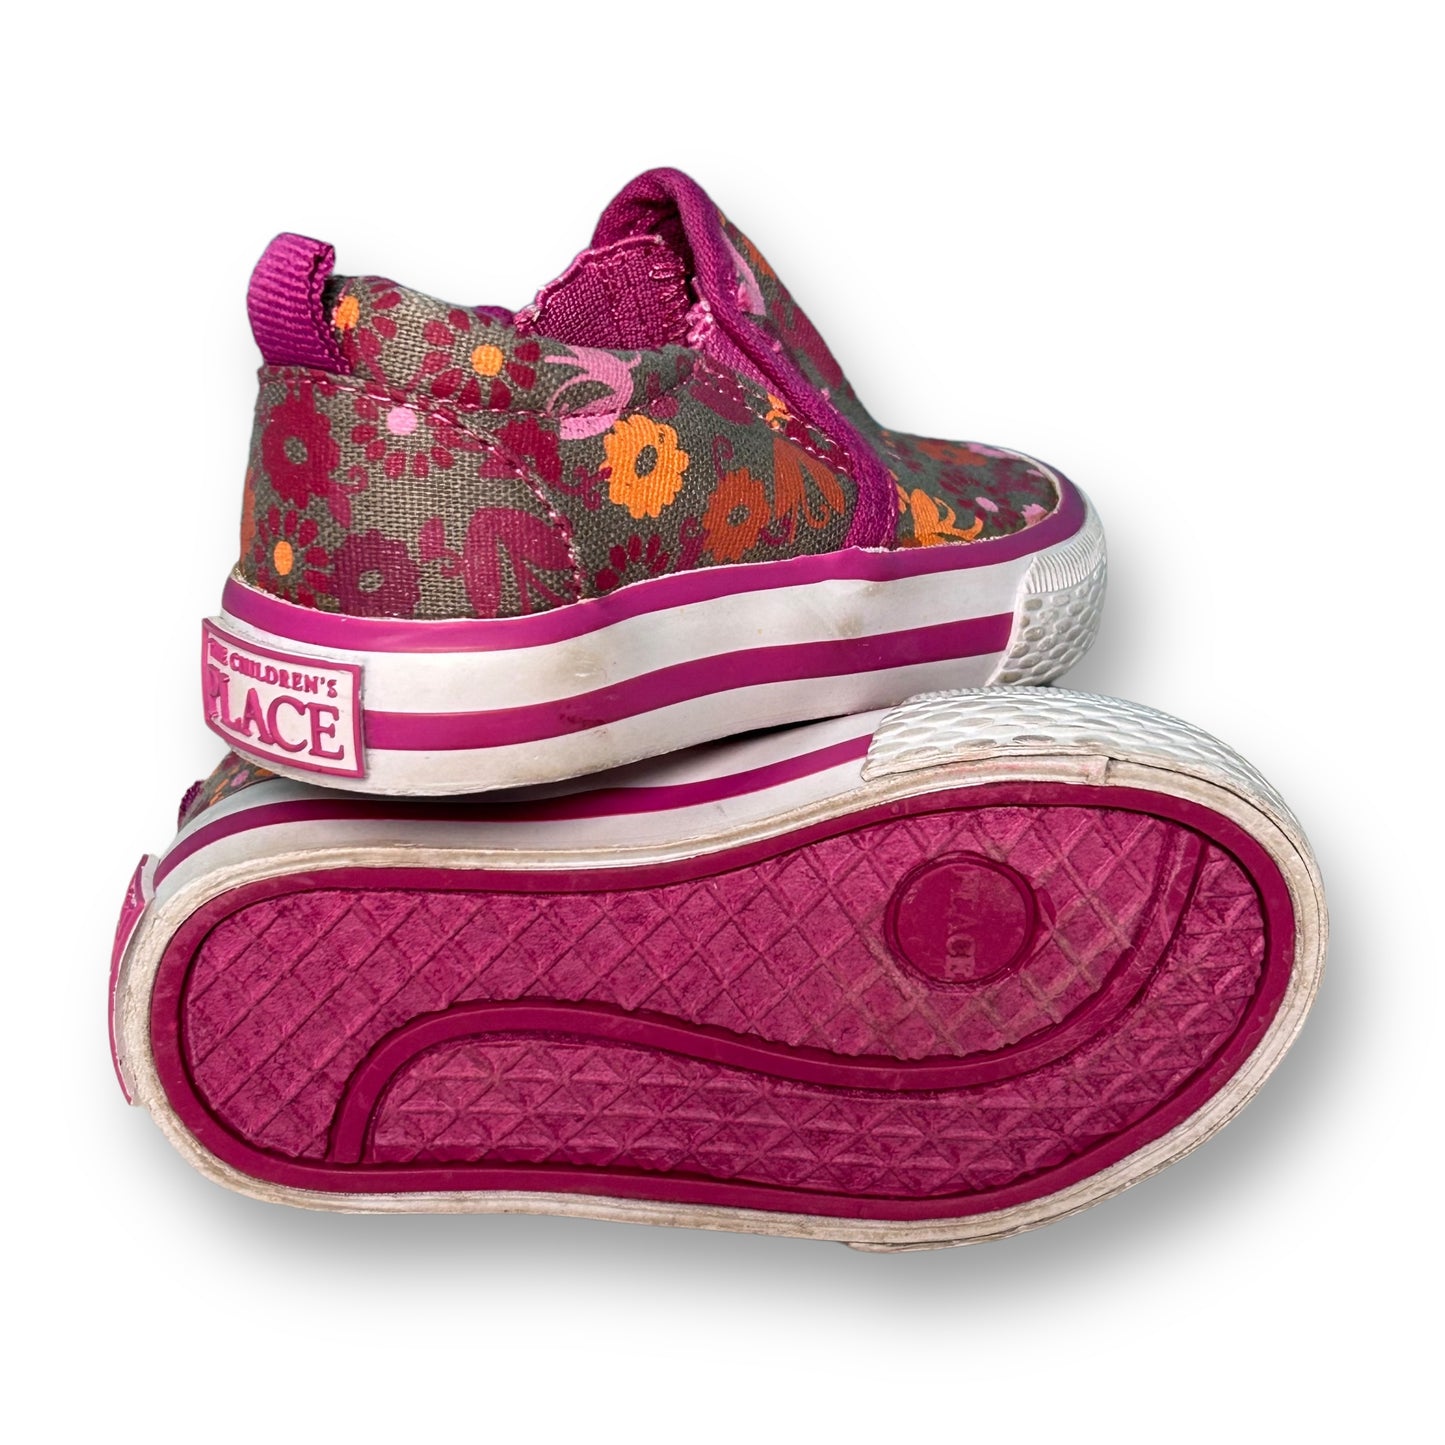 Children's Place Toddler Girl Size 4 Gray & Pink Floral Print Slide-On Shoes